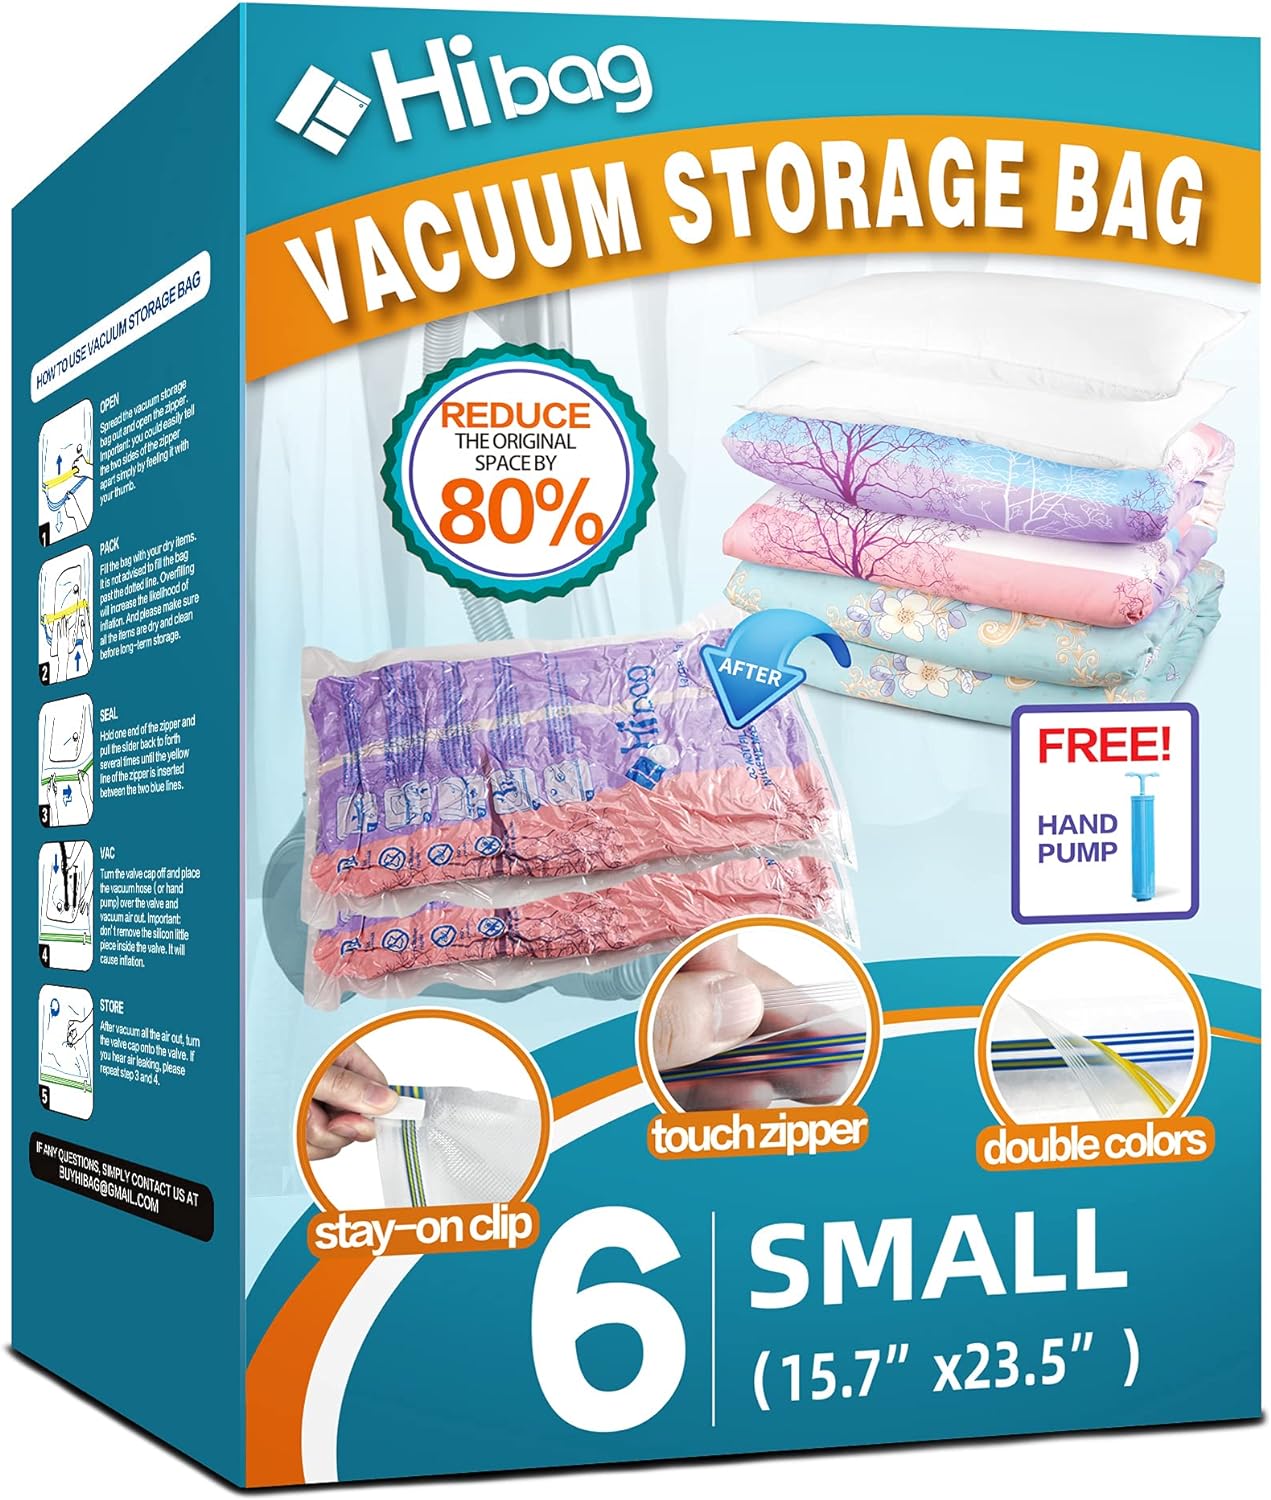 6 Pack Vacuum Storage Bags for Clothes, Clothes Vacuum Bags Save 80% Space, Work with Vacuum Cleaner, Travel Hand Pump Included (6-Small)